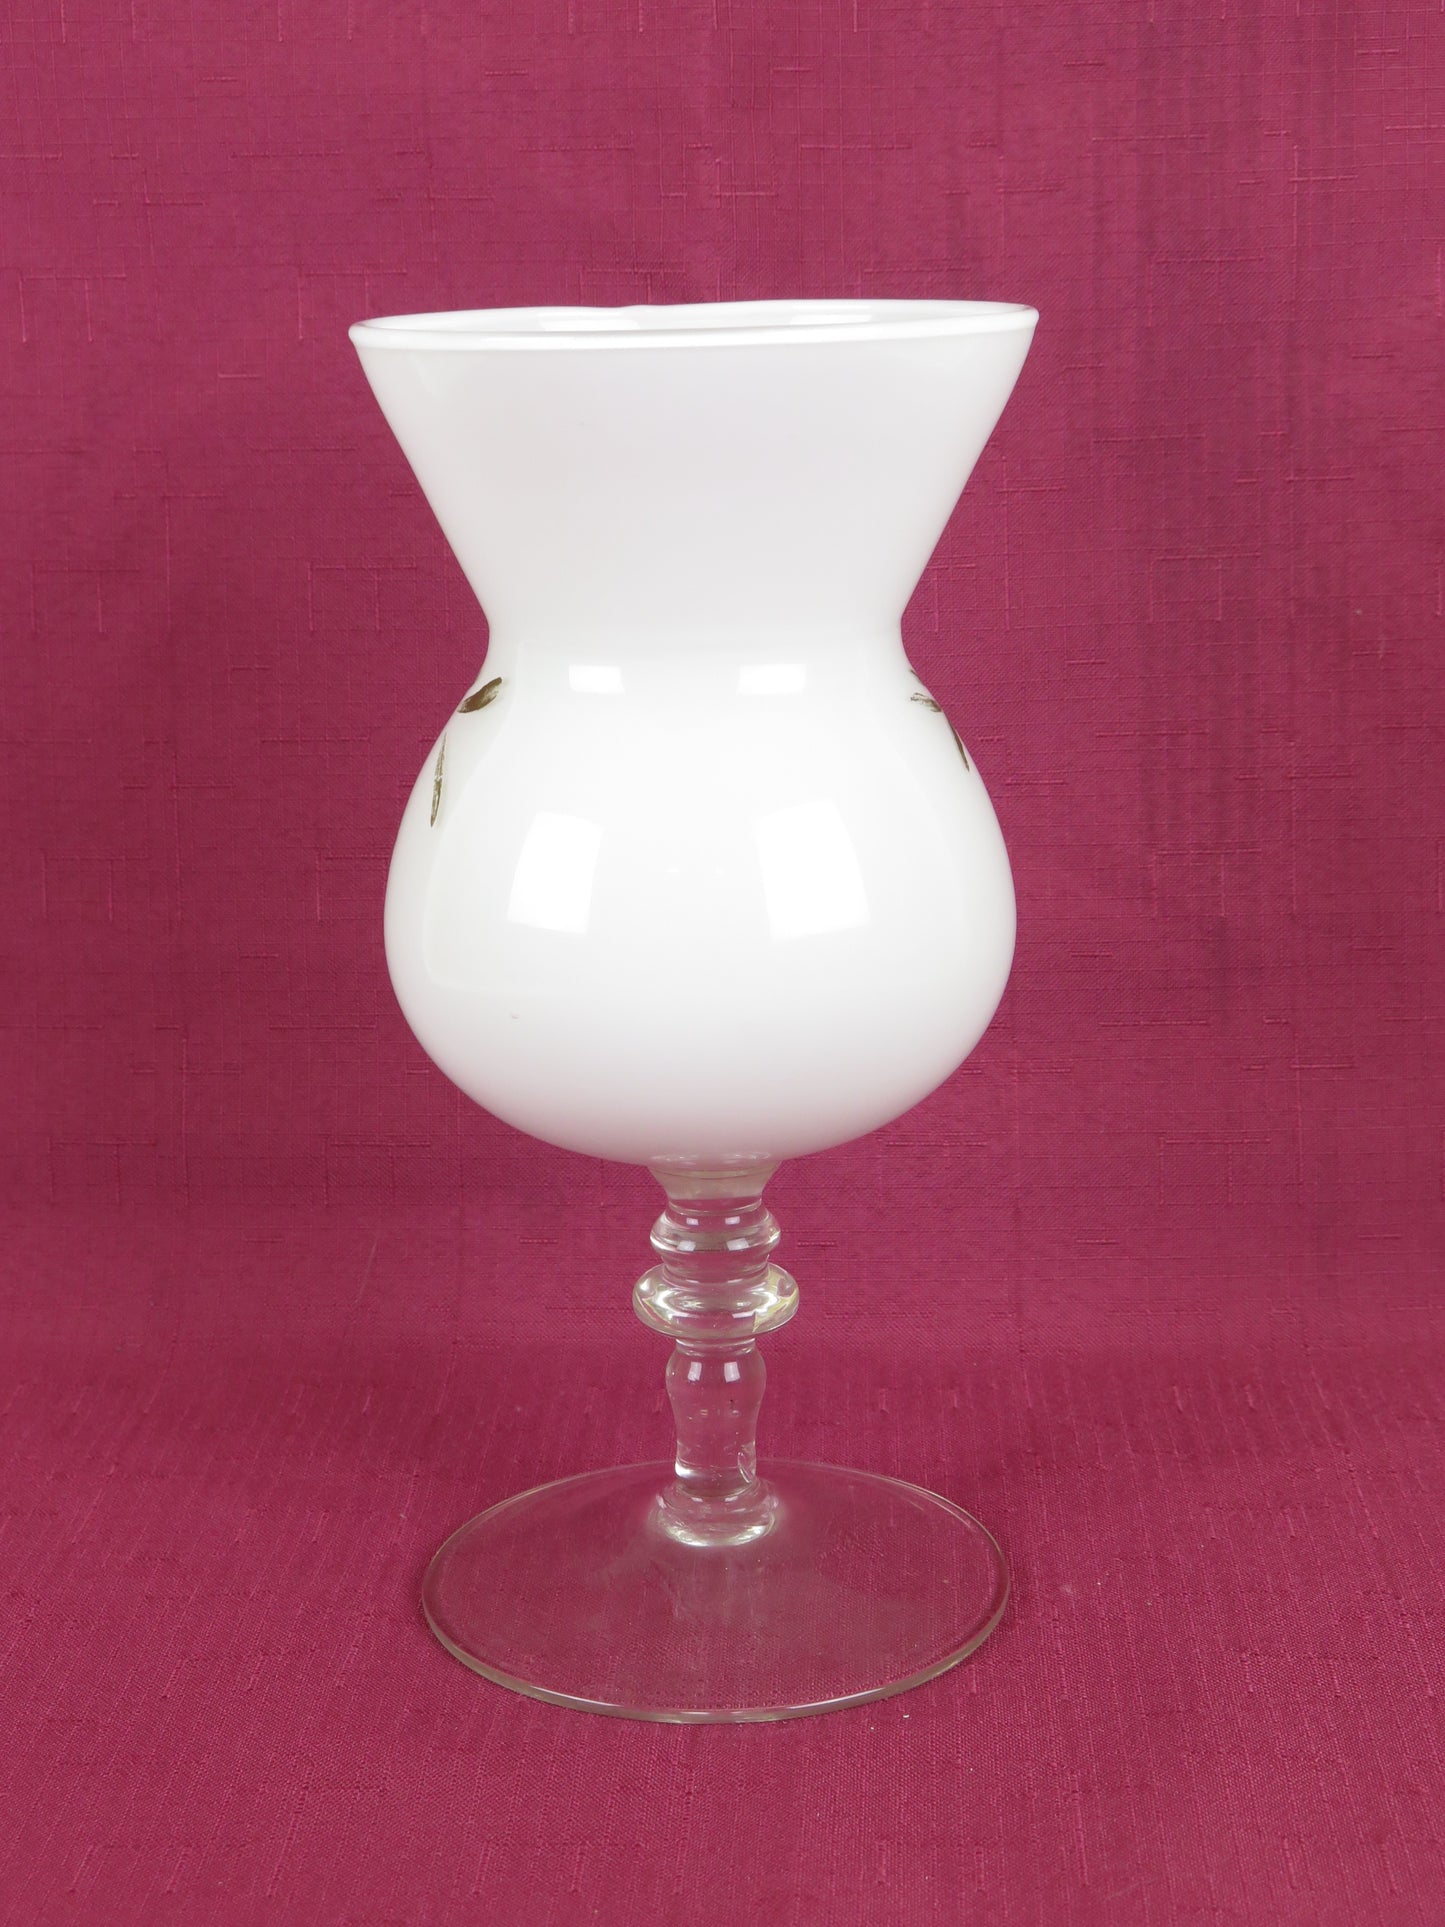 Antique opaline glass vase with floral decorations from the beginning of the century antique vs17 collection